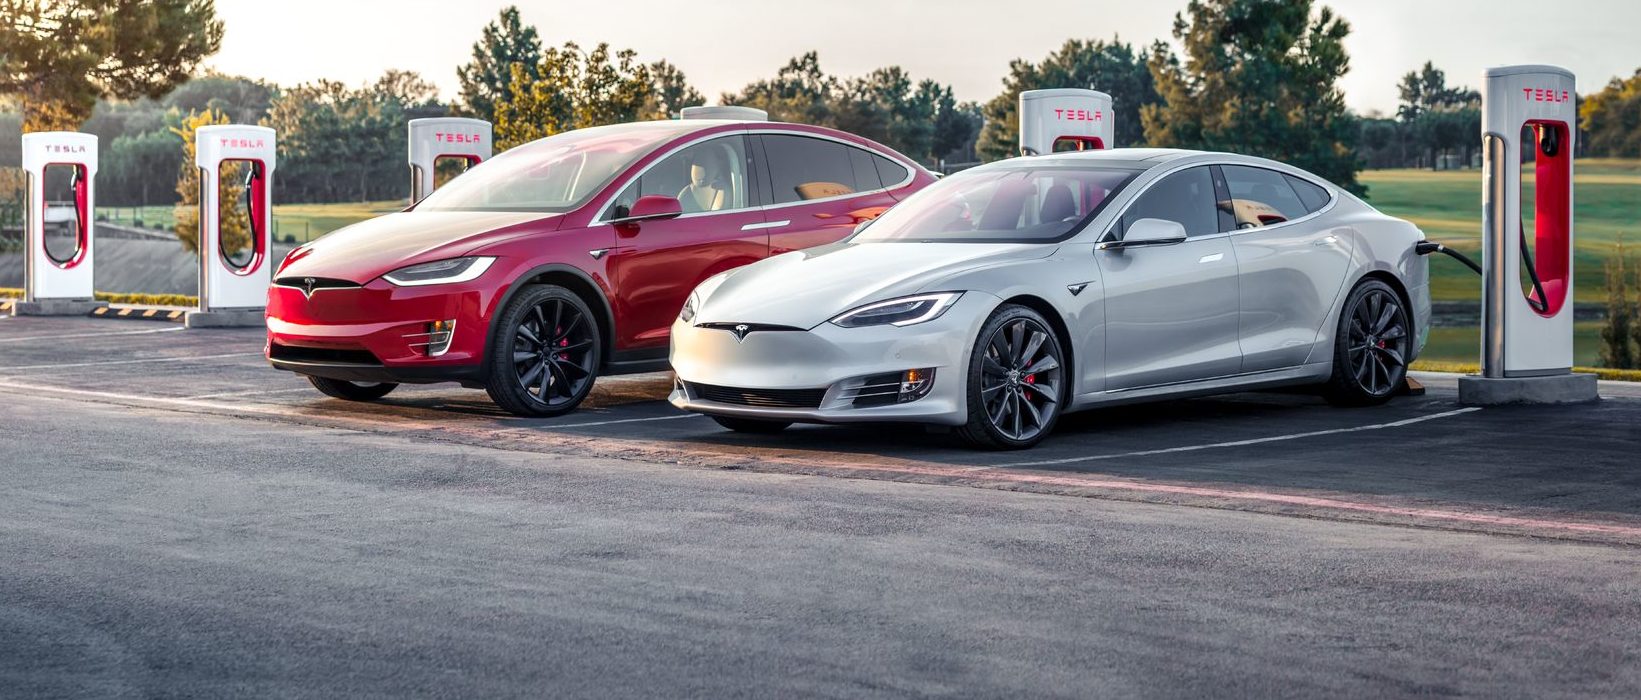 Tesla Boosts Model S And Model X Supercharger Peak Charge Rate